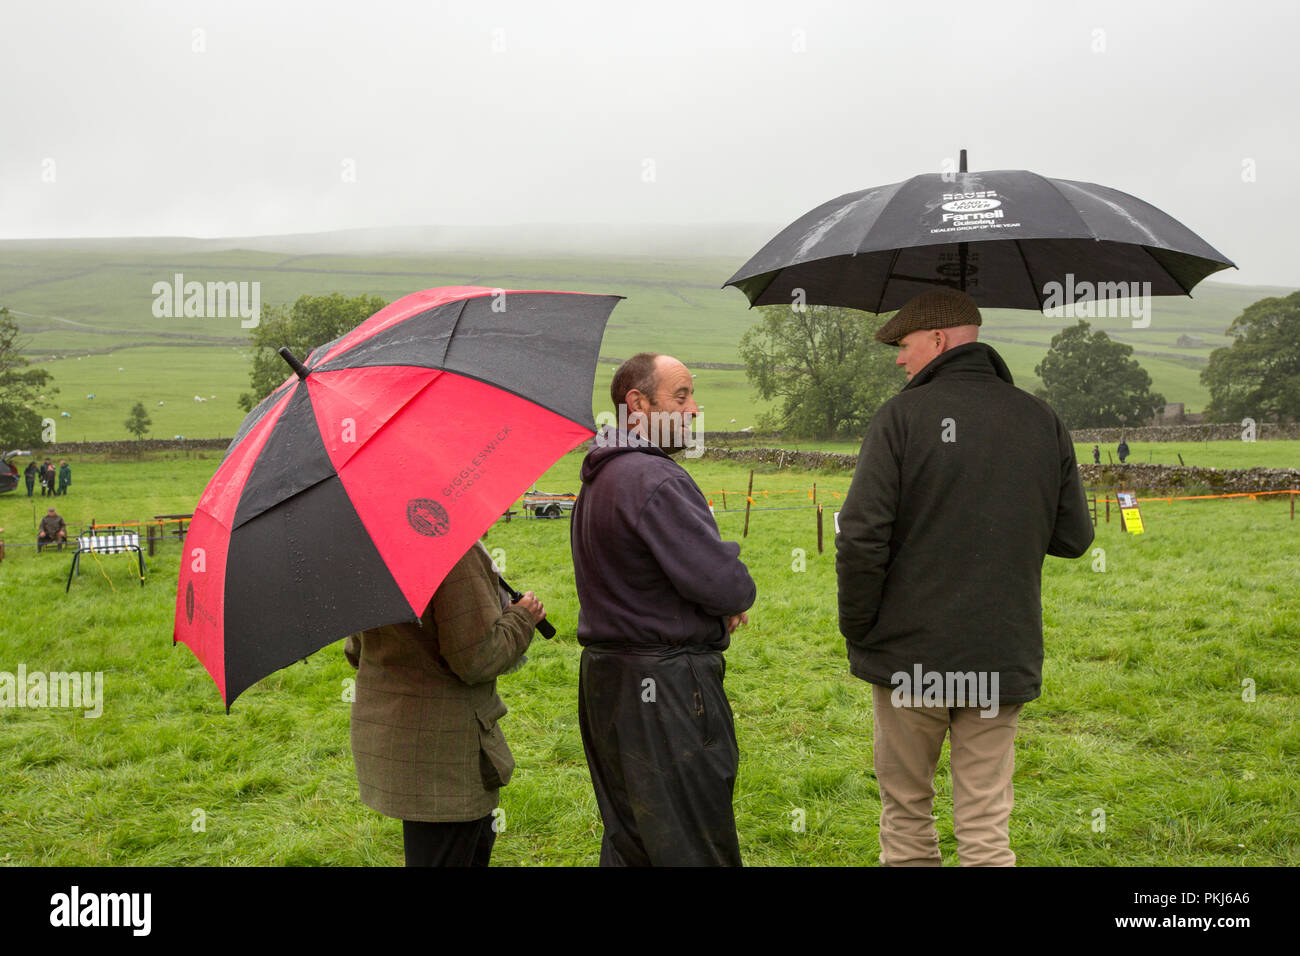 A very wet Halton Gill Gala in littondale, Yorkshire Dales, UK. Stock Photo